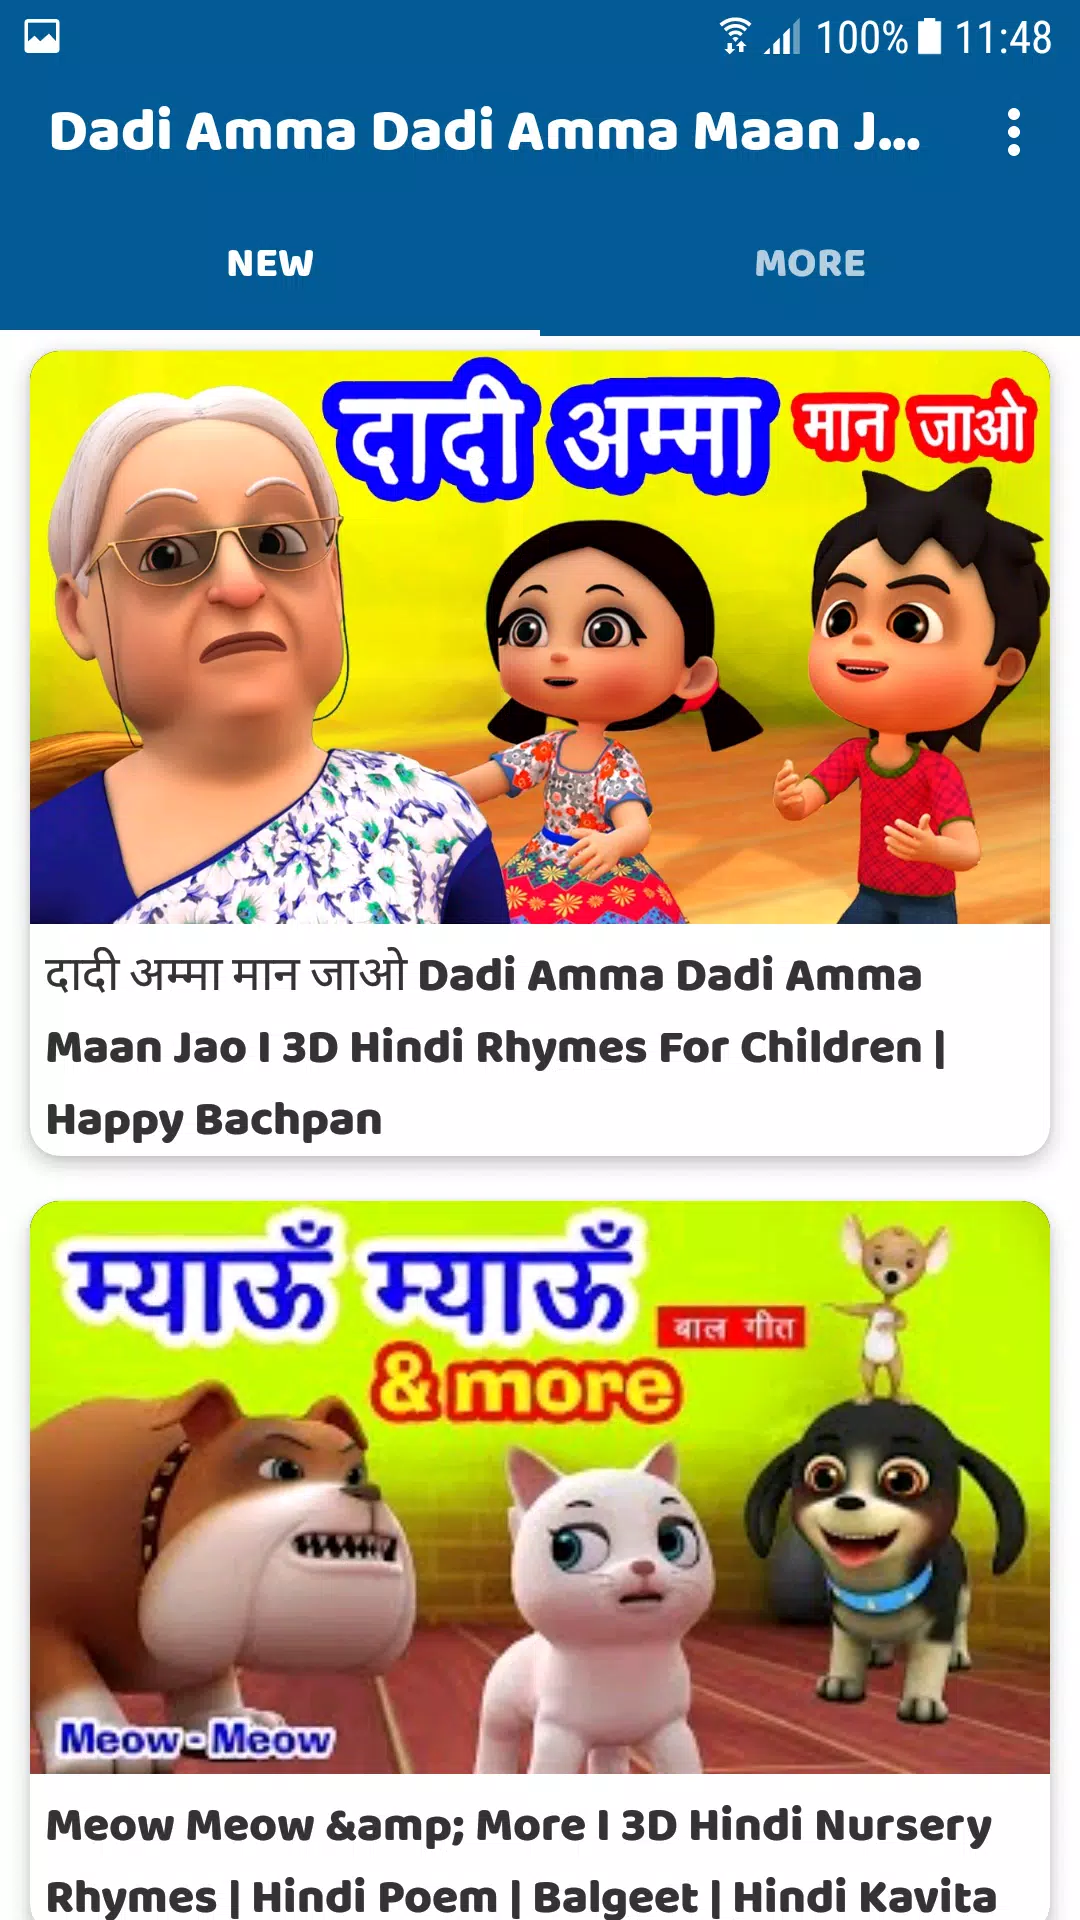 Dadi Amma Dadi Amma Maan Jao poem - Video for Kids APK for Android Download